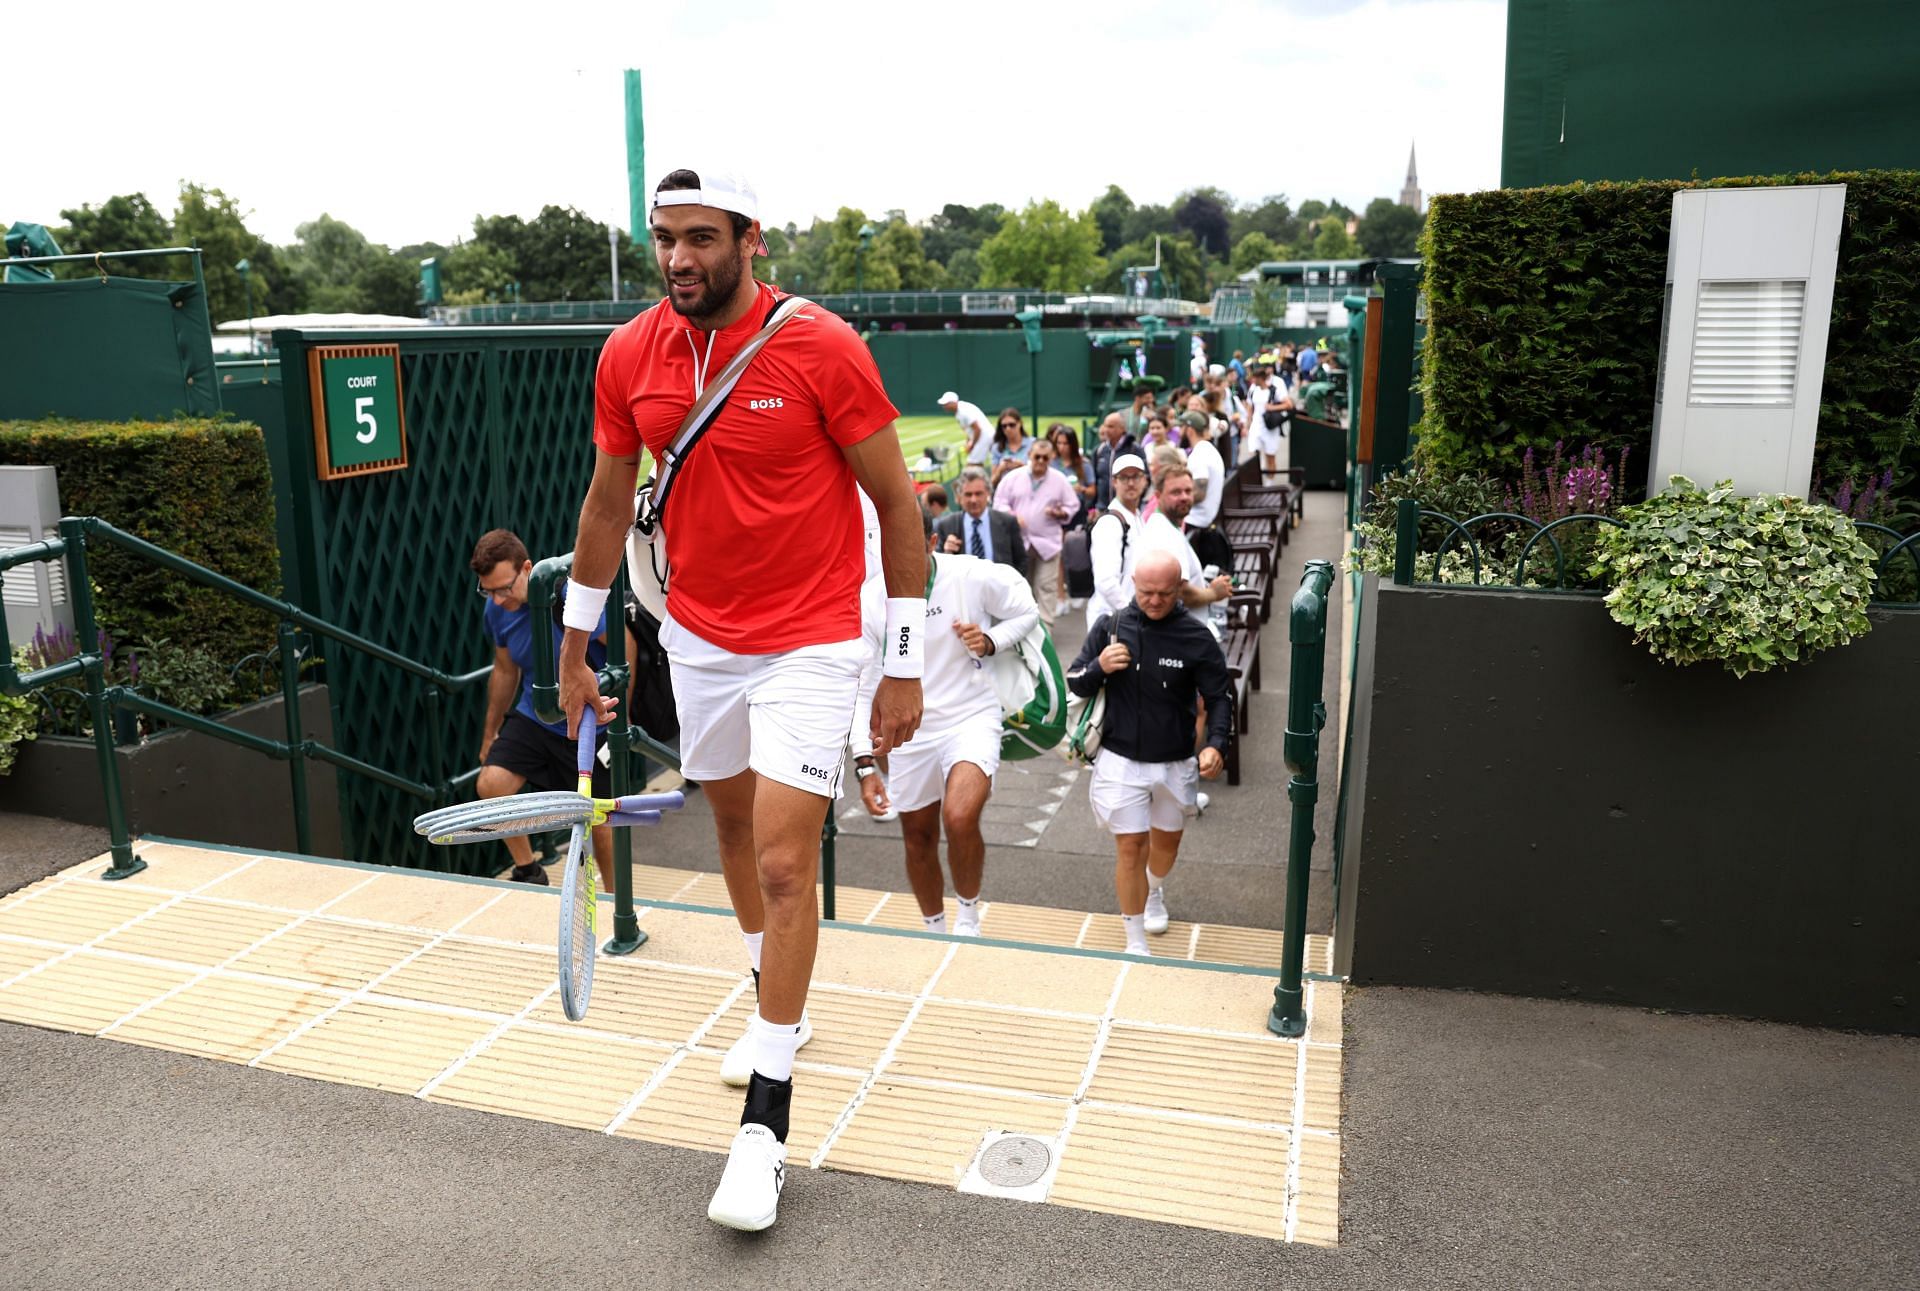 Berrettini emerging from a training session before he withdrew from Wimbledon this year.